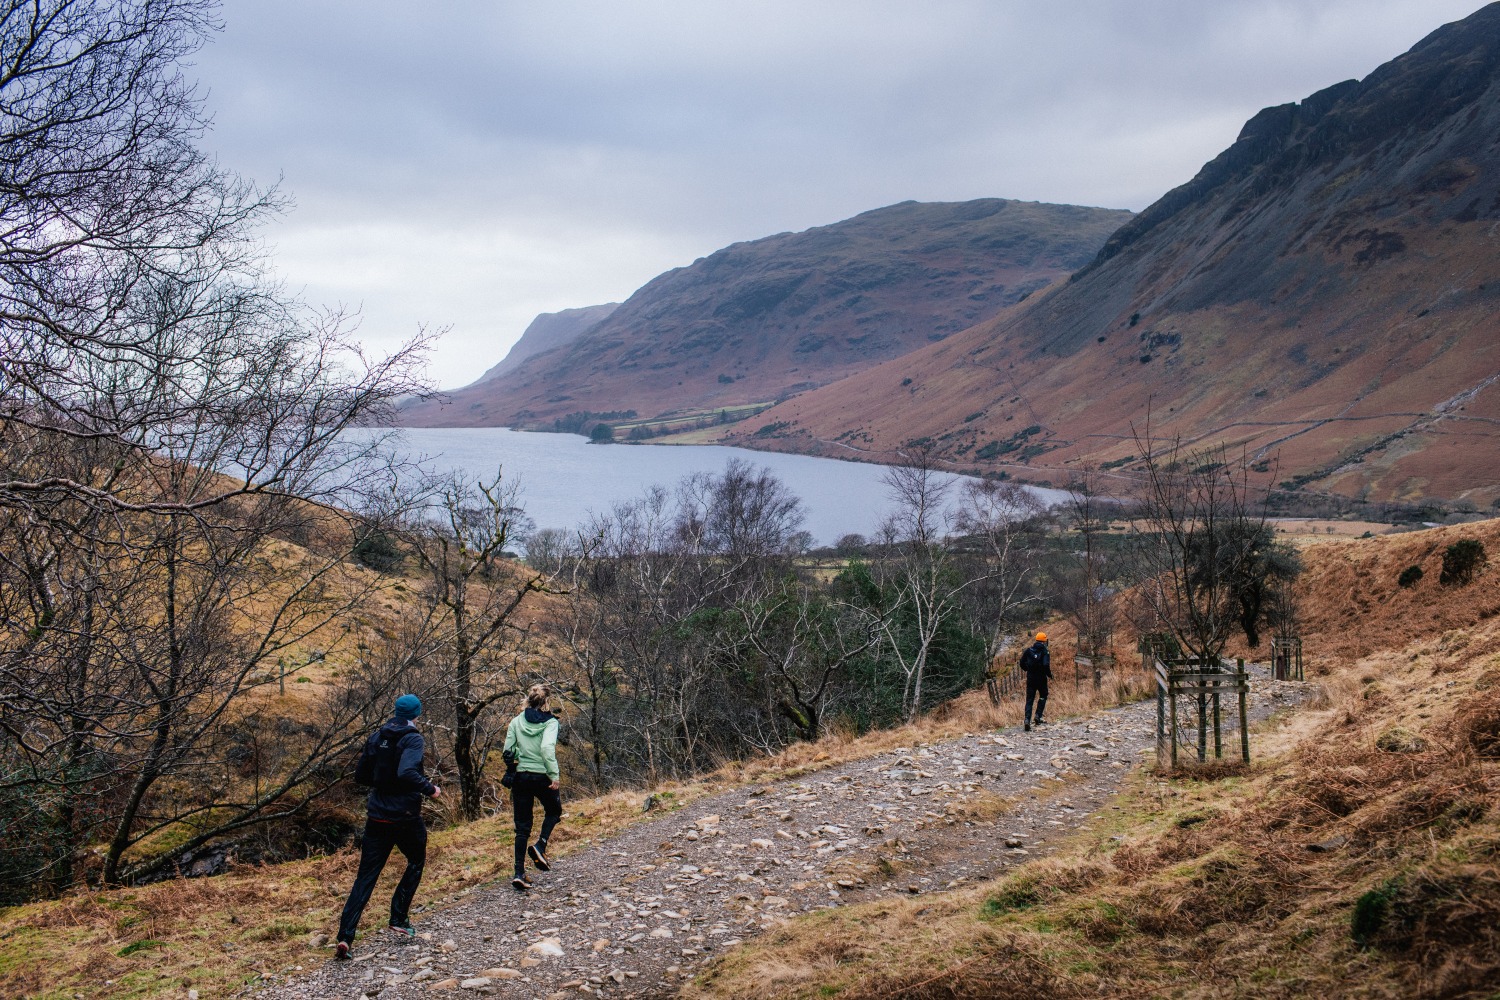 People running along path next to lake with hills in background - Lake District